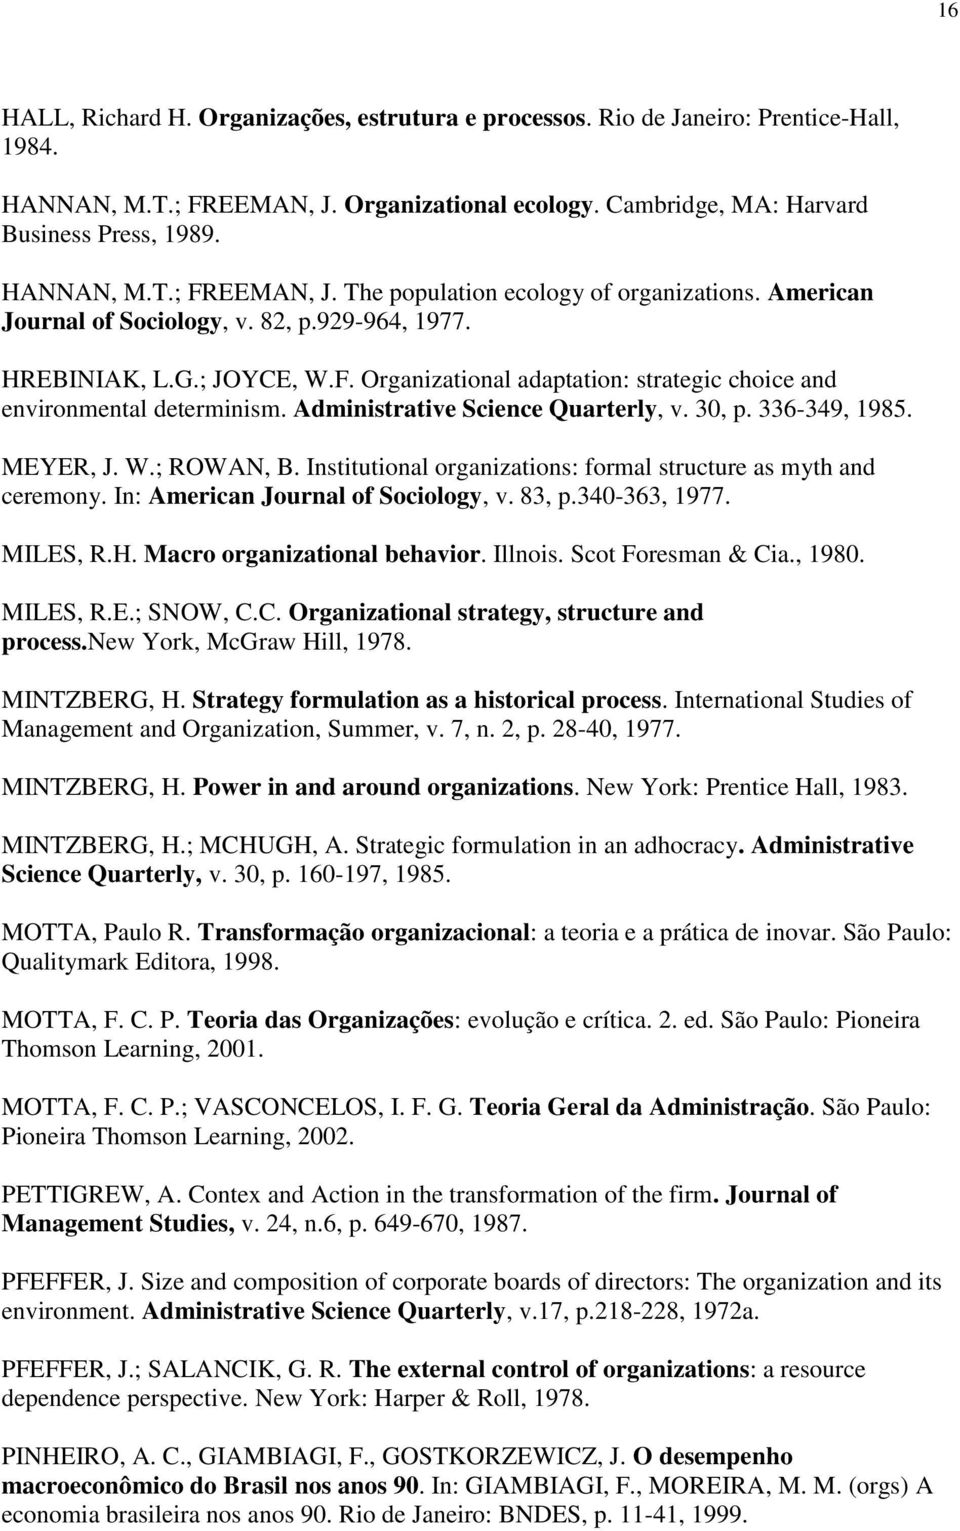 30, p. 336-349, 1985. MEYER, J. W.; ROWAN, B. Institutional organizations: formal structure as myth and ceremony. In: American Journal of Sociology, v. 83, p.340-363, 1977. MILES, R.H.